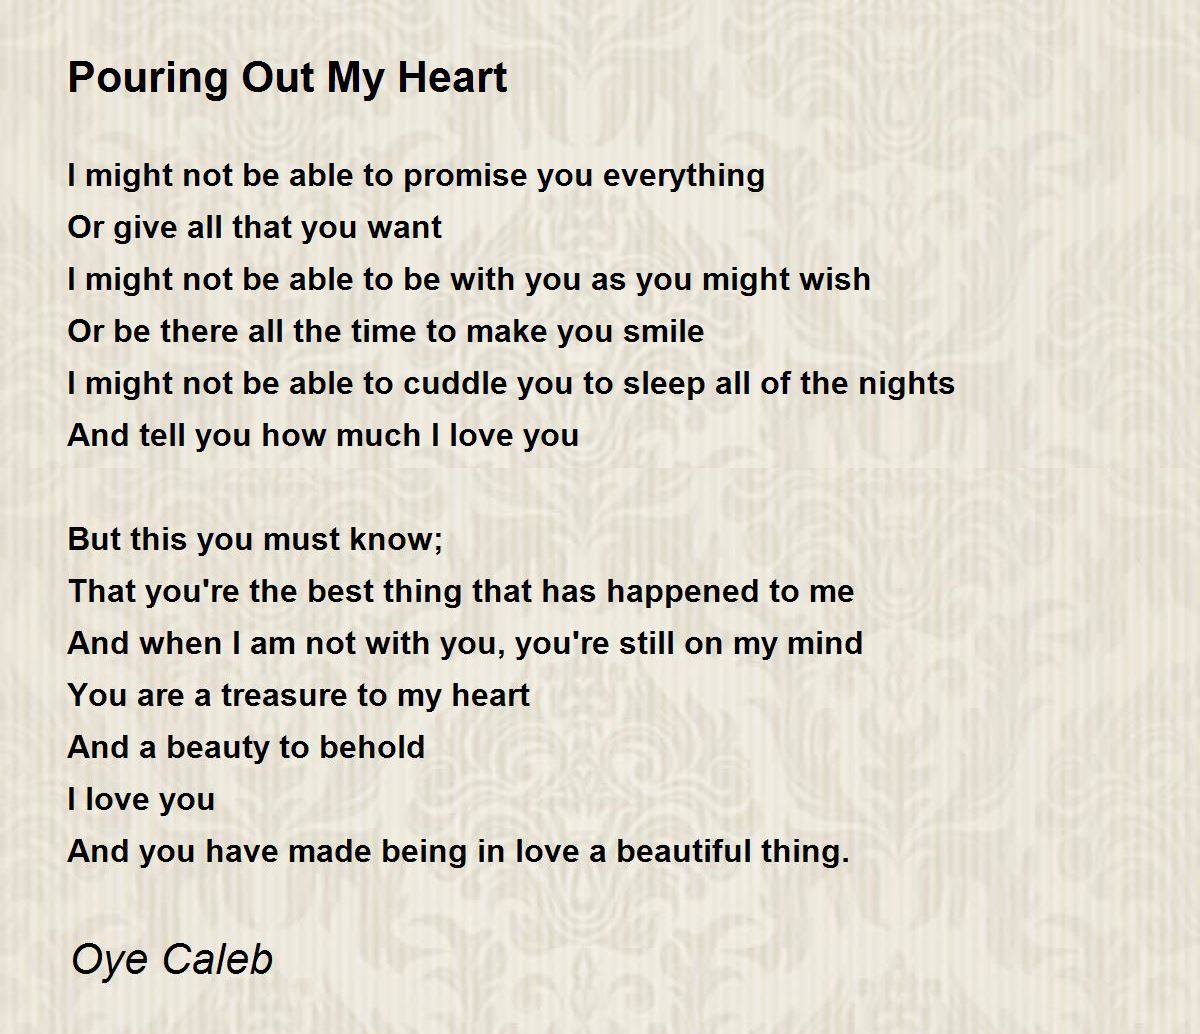 Pouring Your Heart Out